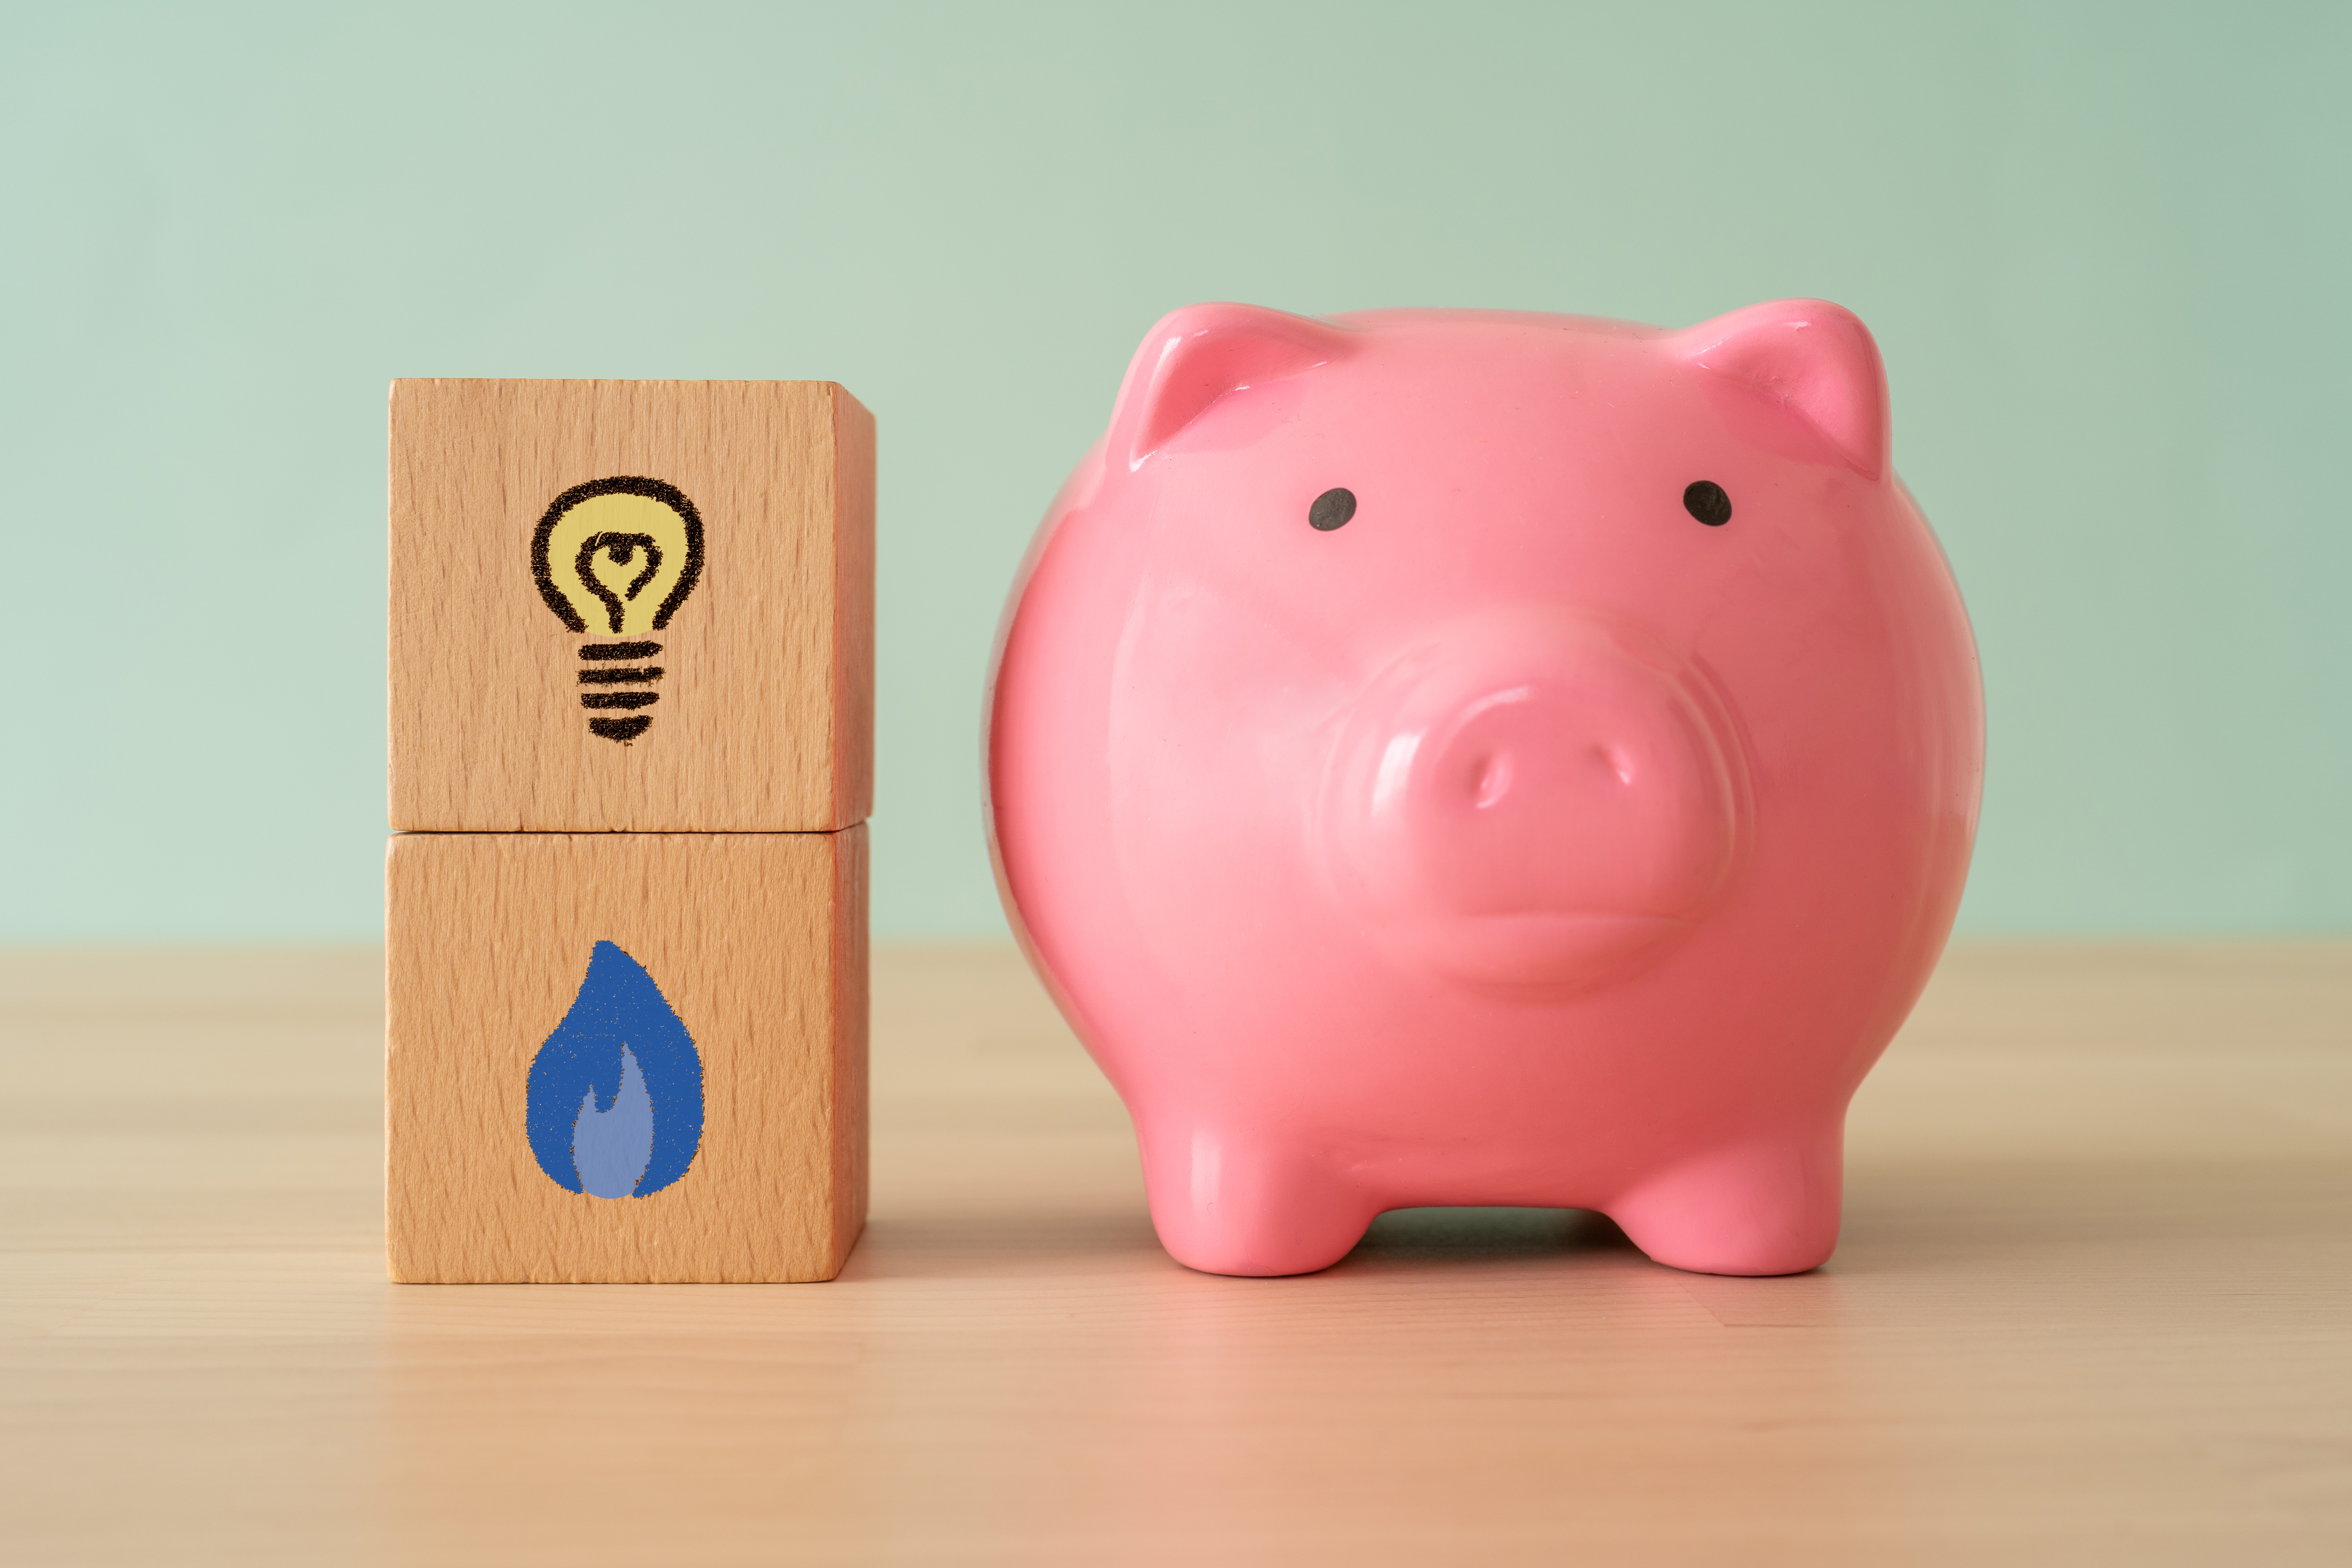 Image of Piggy Bank next to Blocks with Gas and Electricity icons on